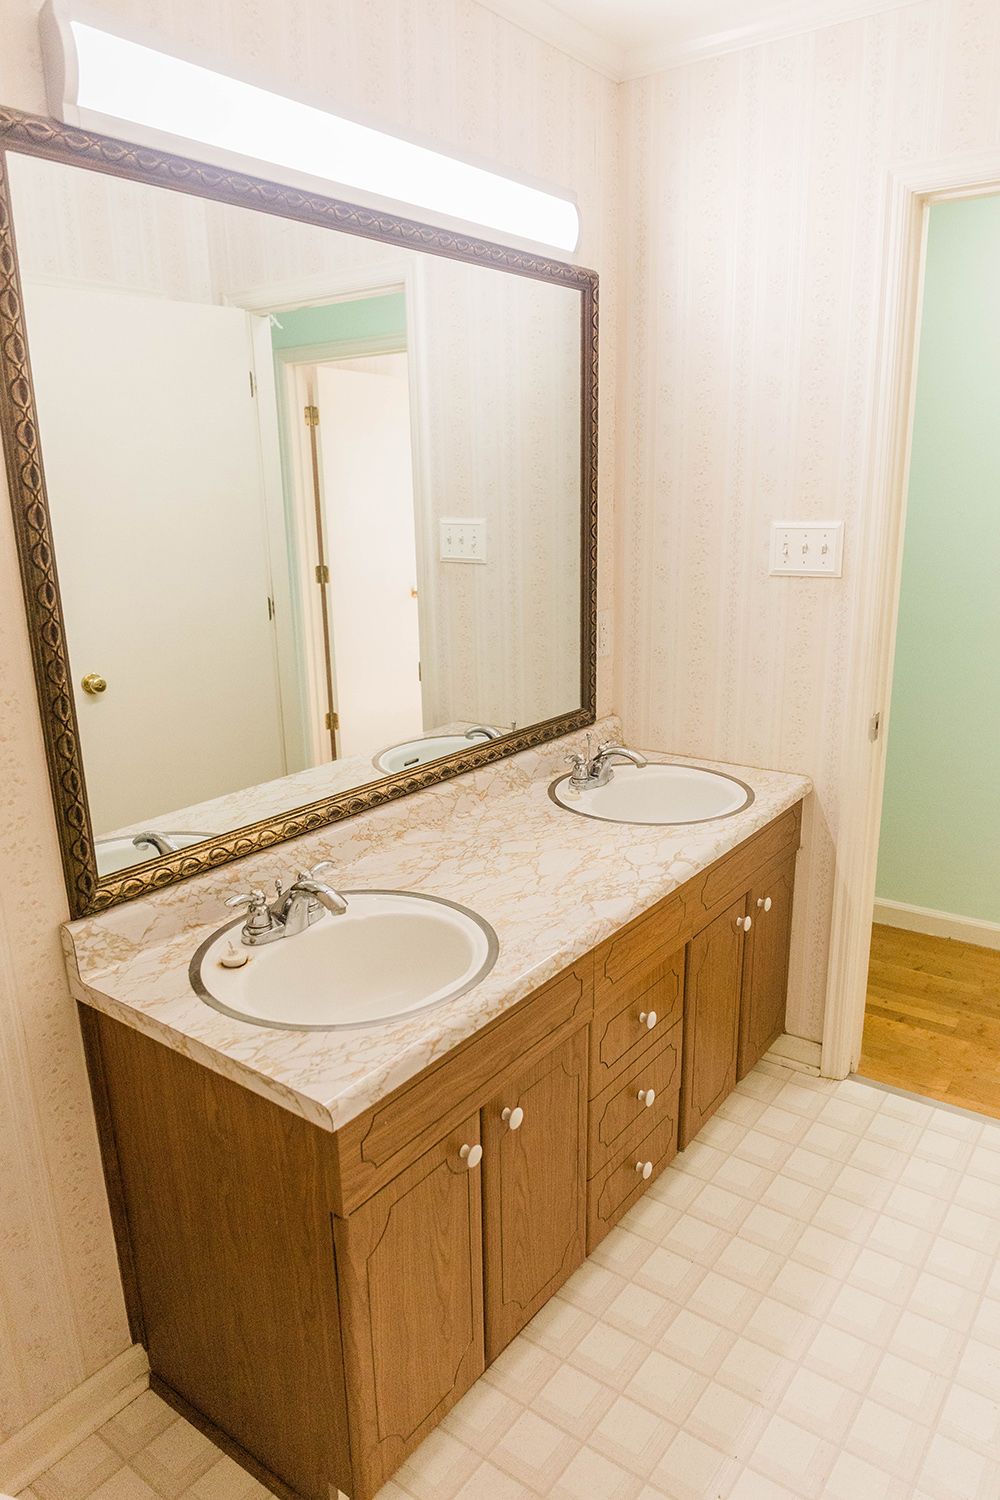 Before/After: Dated Retro Bathroom